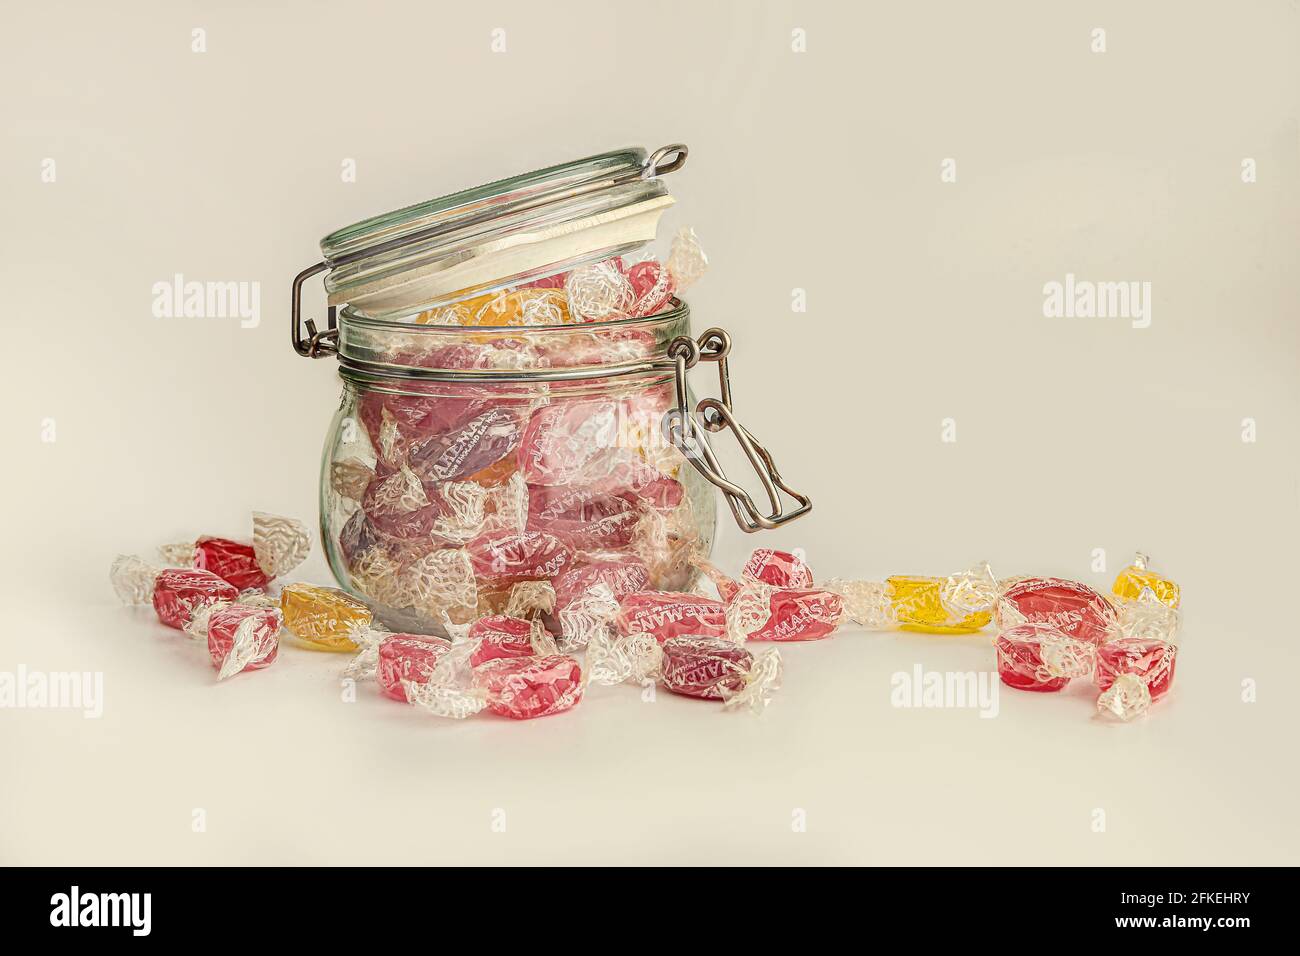 Kilner Jar Filled To Overflowing with Cough Sweets on a White Background Stock Photo